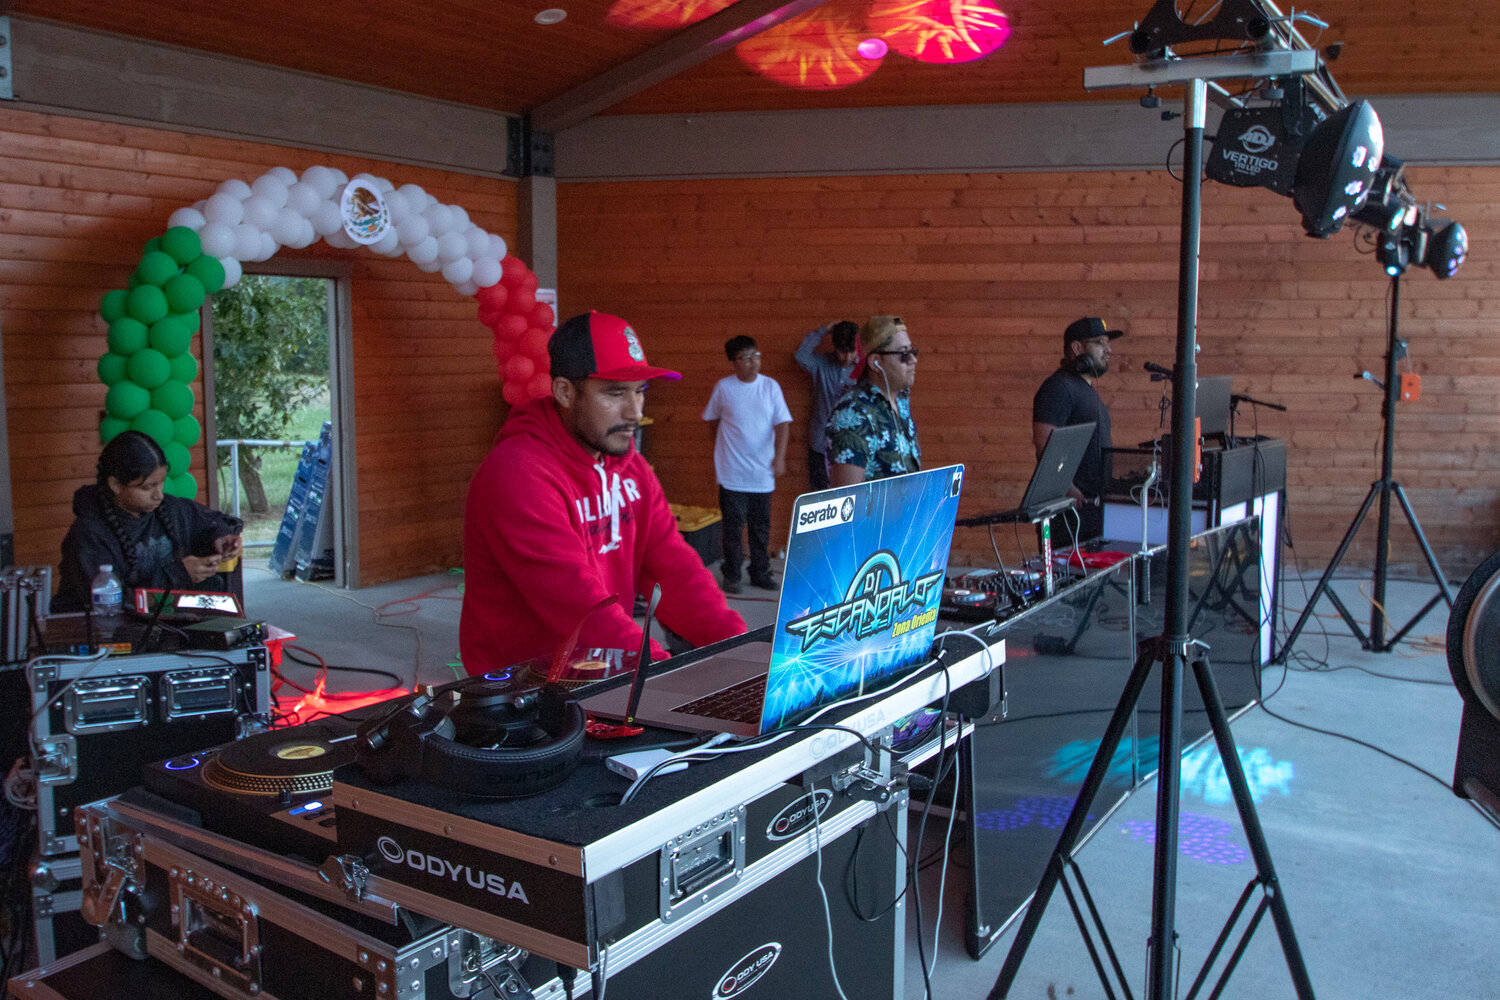 Members of DJ Escandalo Zona Orienta play dance music as the sun sets on Saturday, Sept. 16 during Mossyrock's Mexican Independence Day celebration at Klickitat Prairie Park.